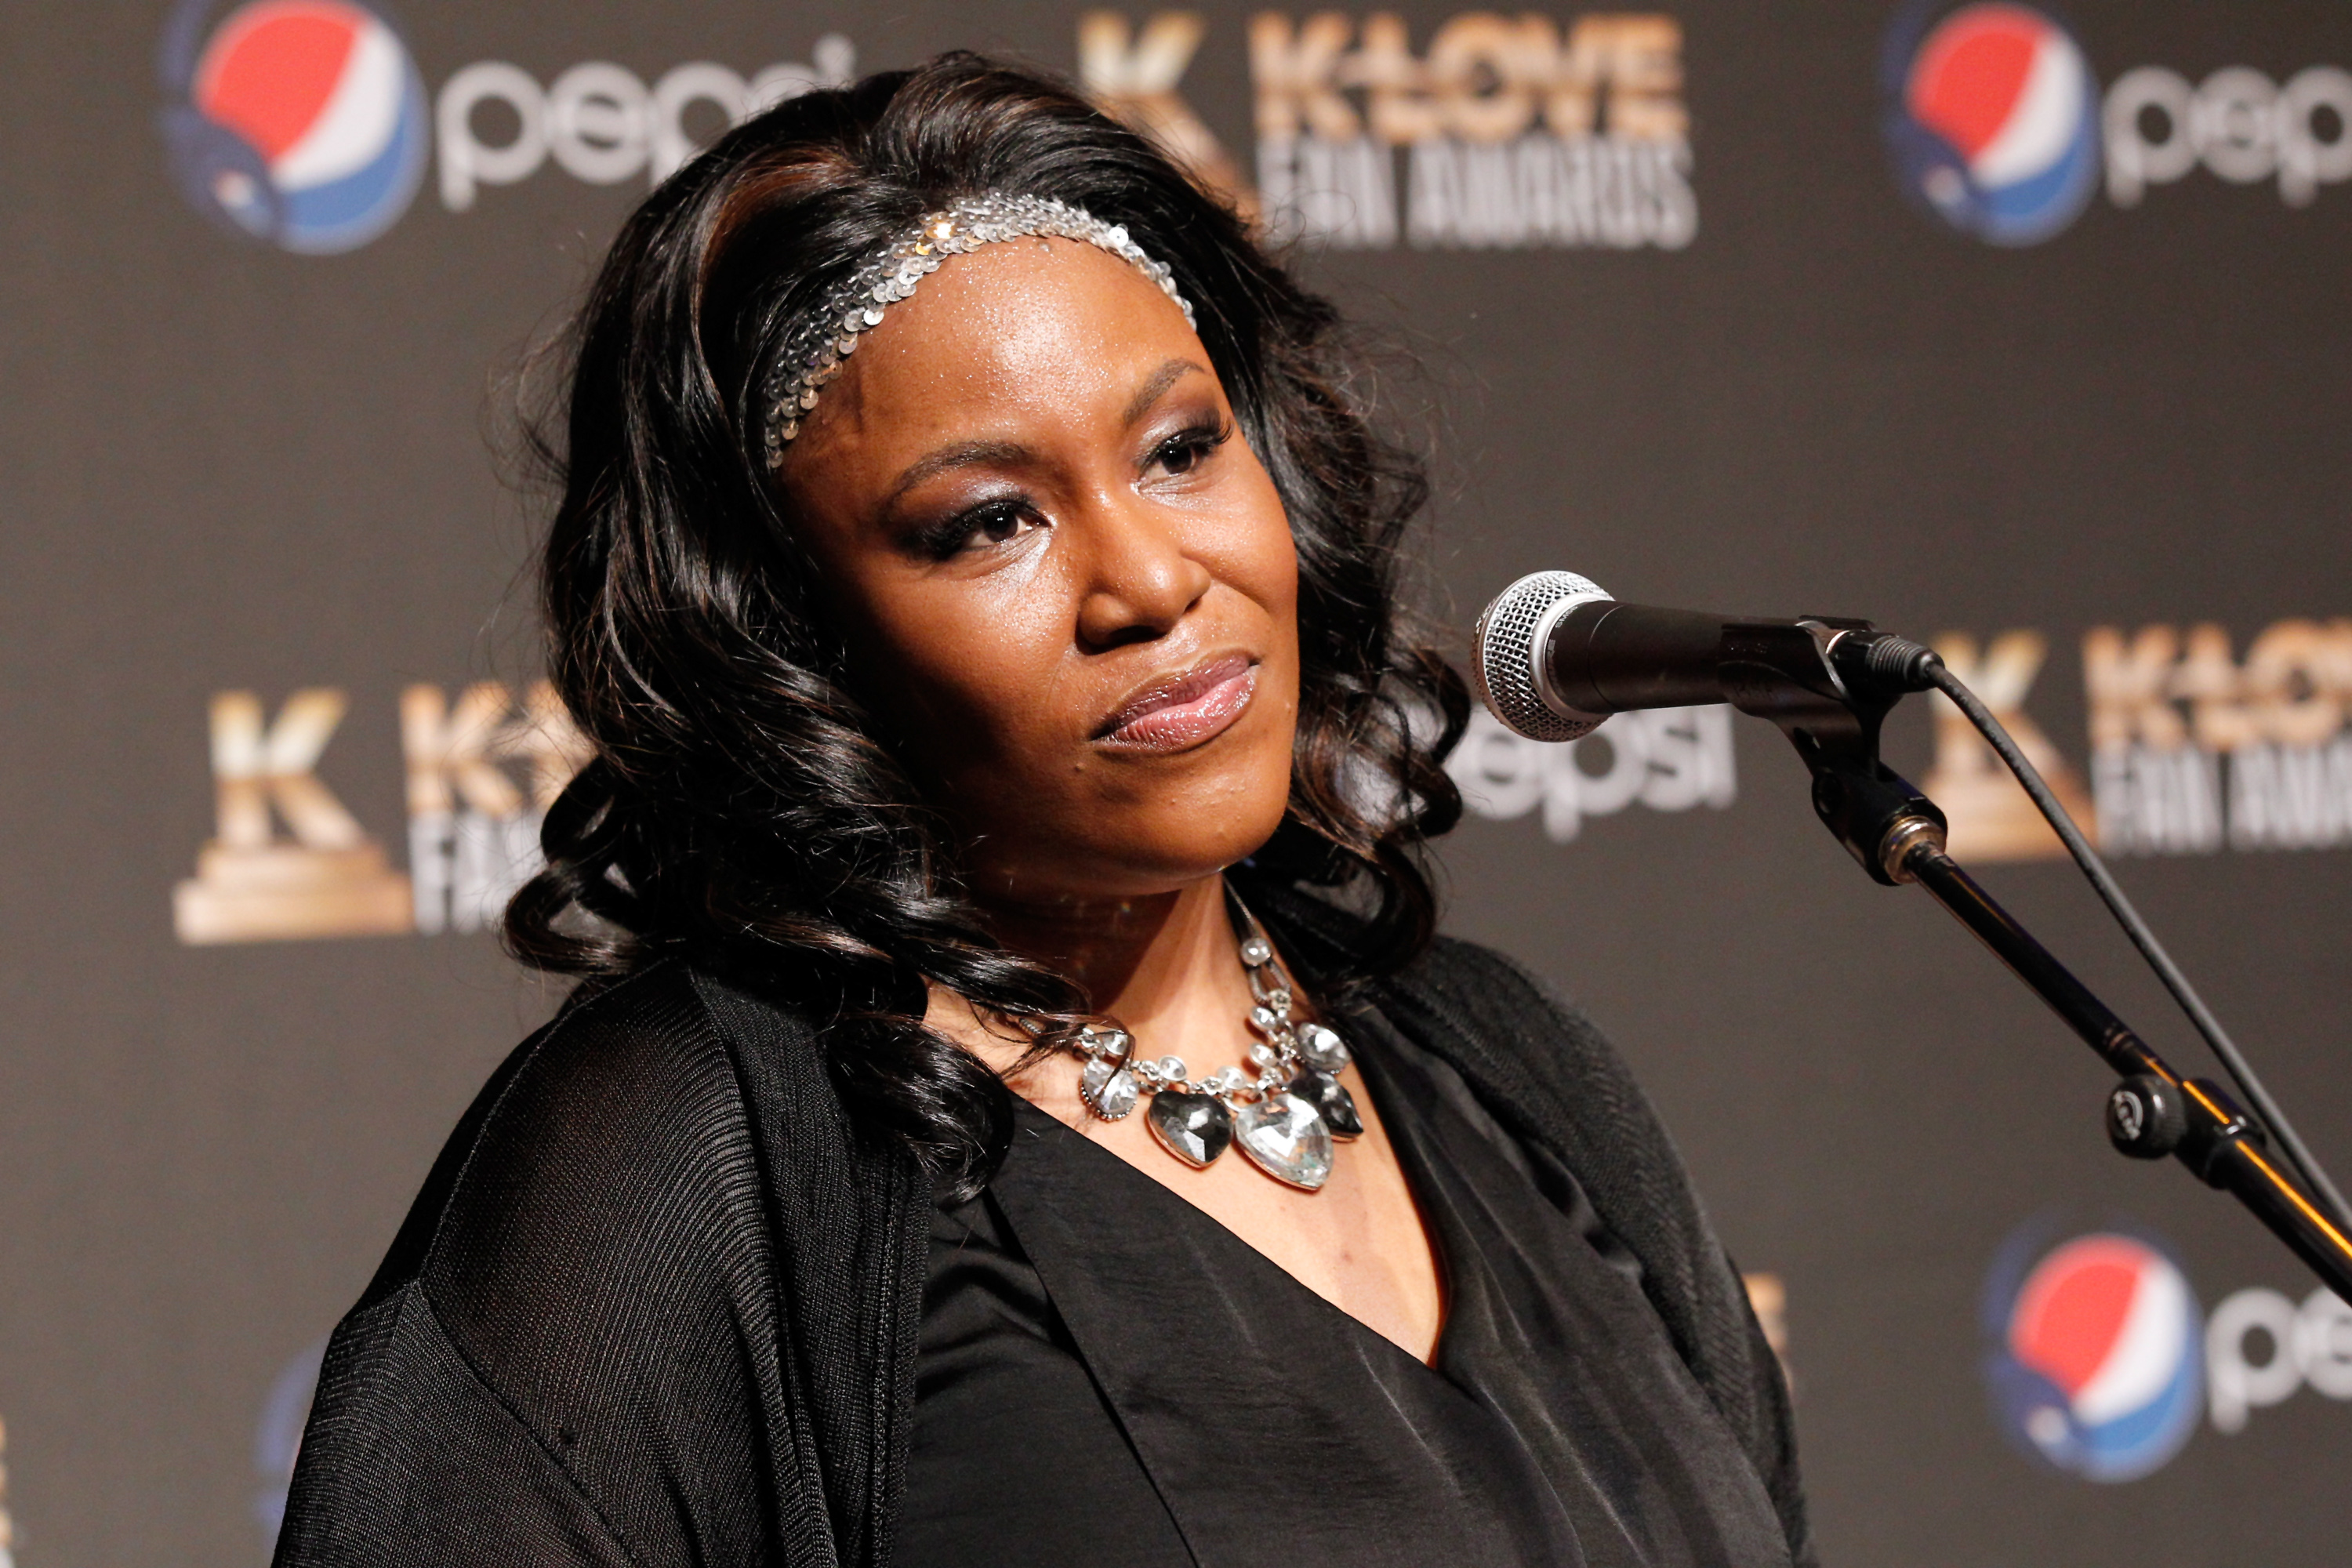 Mandisa at the 2nd Annual KLOVE Fan Awards in Nashville, Tennessee on June 1, 2014 | Source: Getty Images